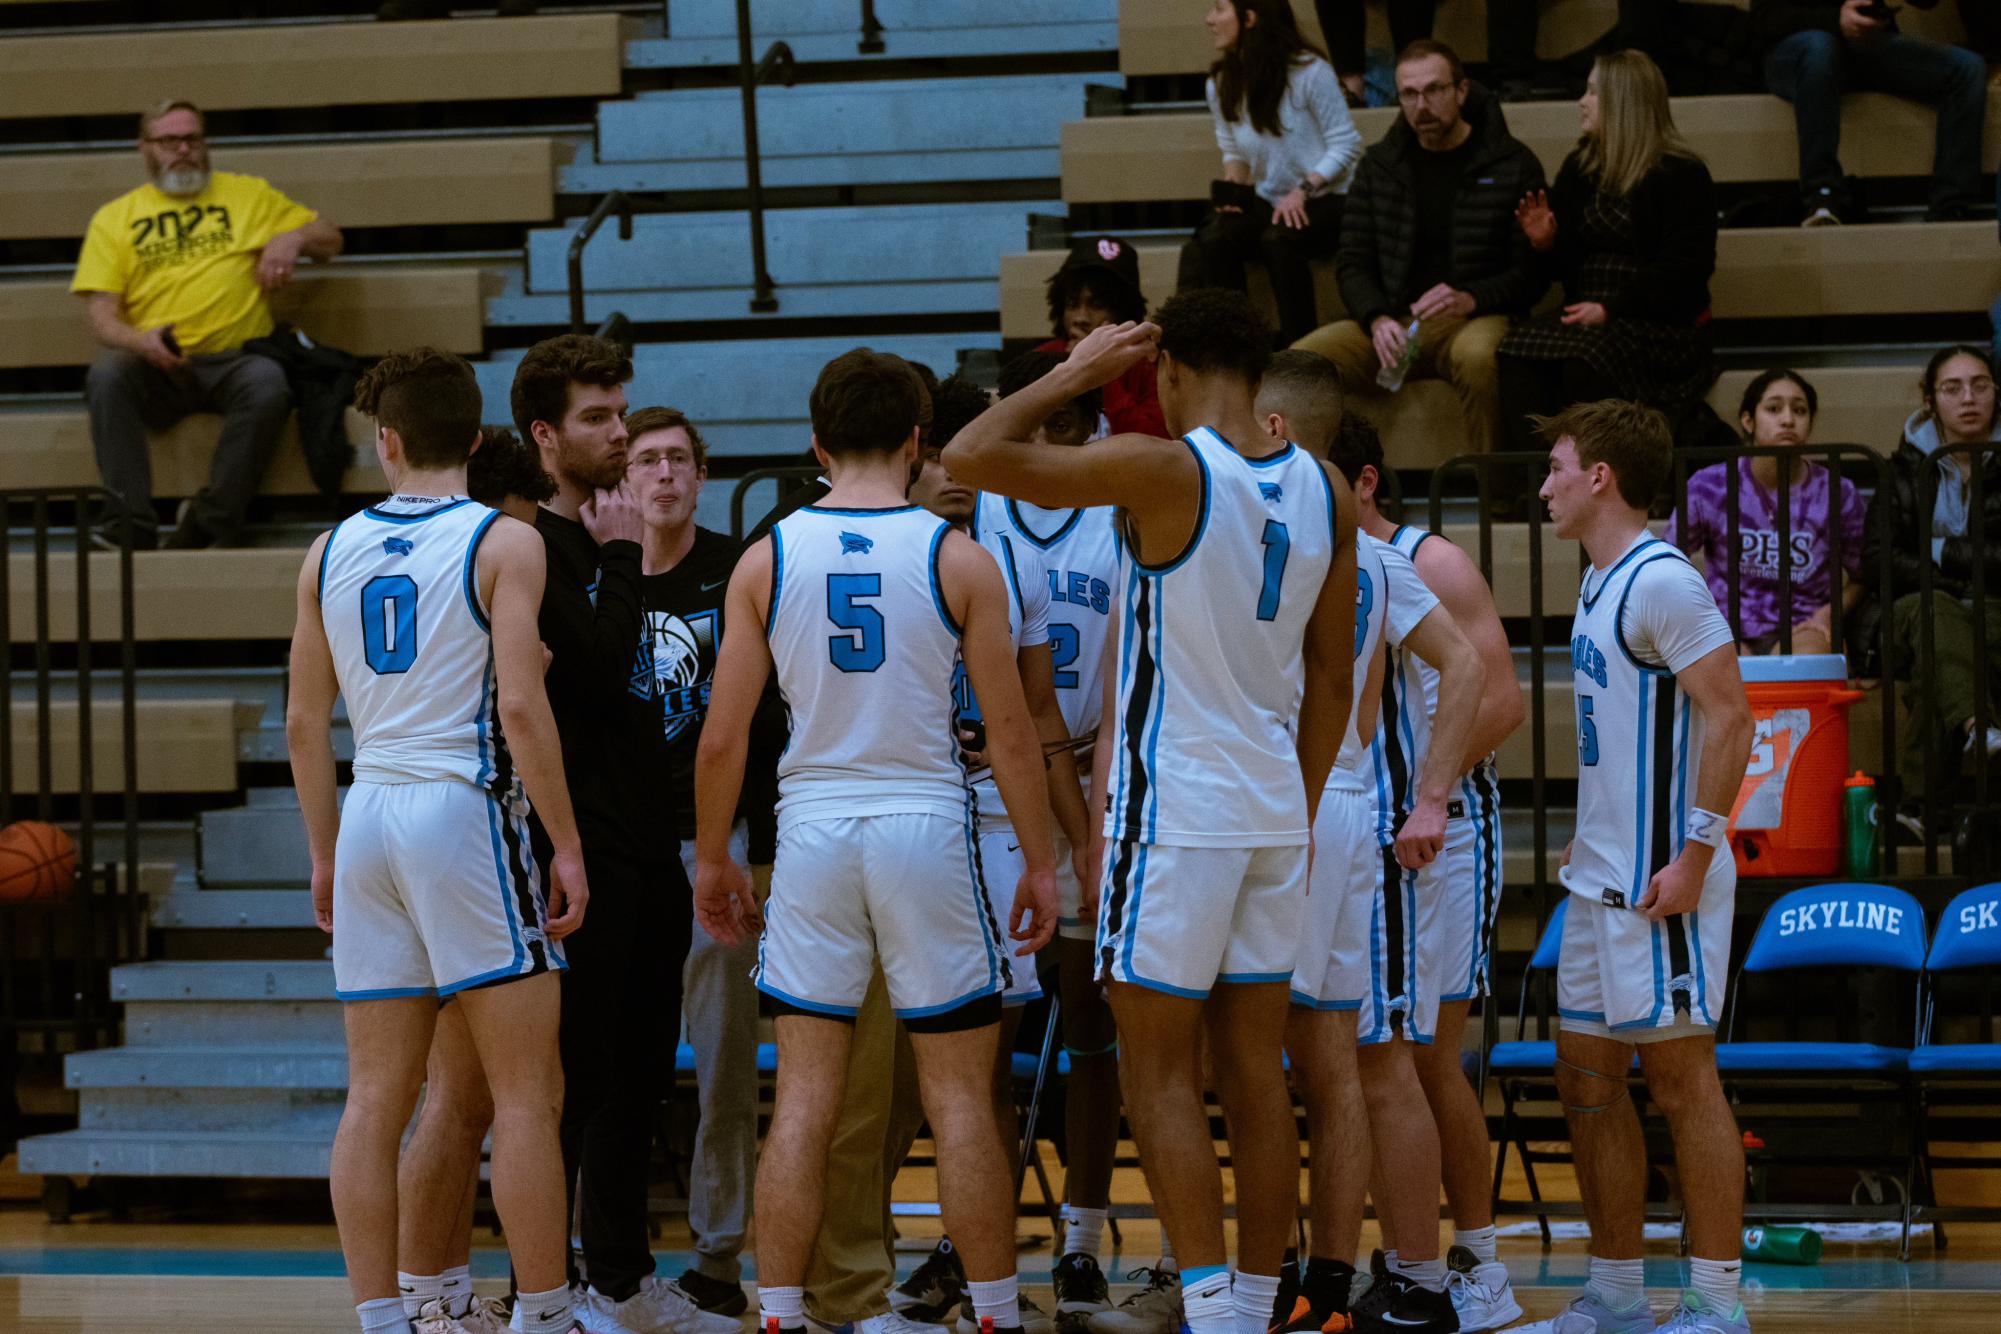 Skyline Varsity Basketball team talking about their strategy during one of their home games. Credit: Jackson Armstrong.